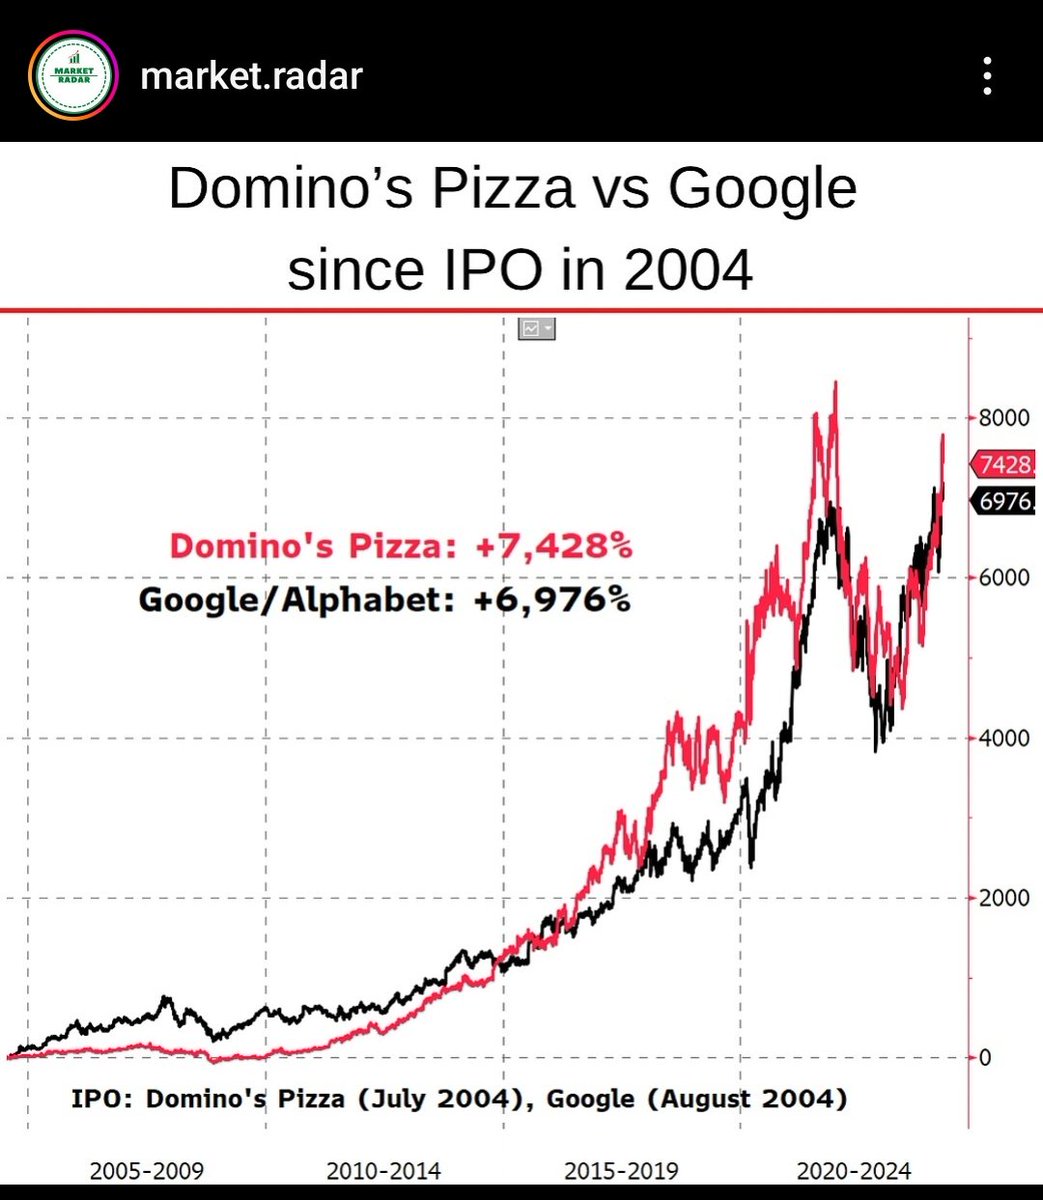 Investors: AI is the next big thing, we need to invest in it heavily to capture growth.

Dominos: Hold my pineapples.